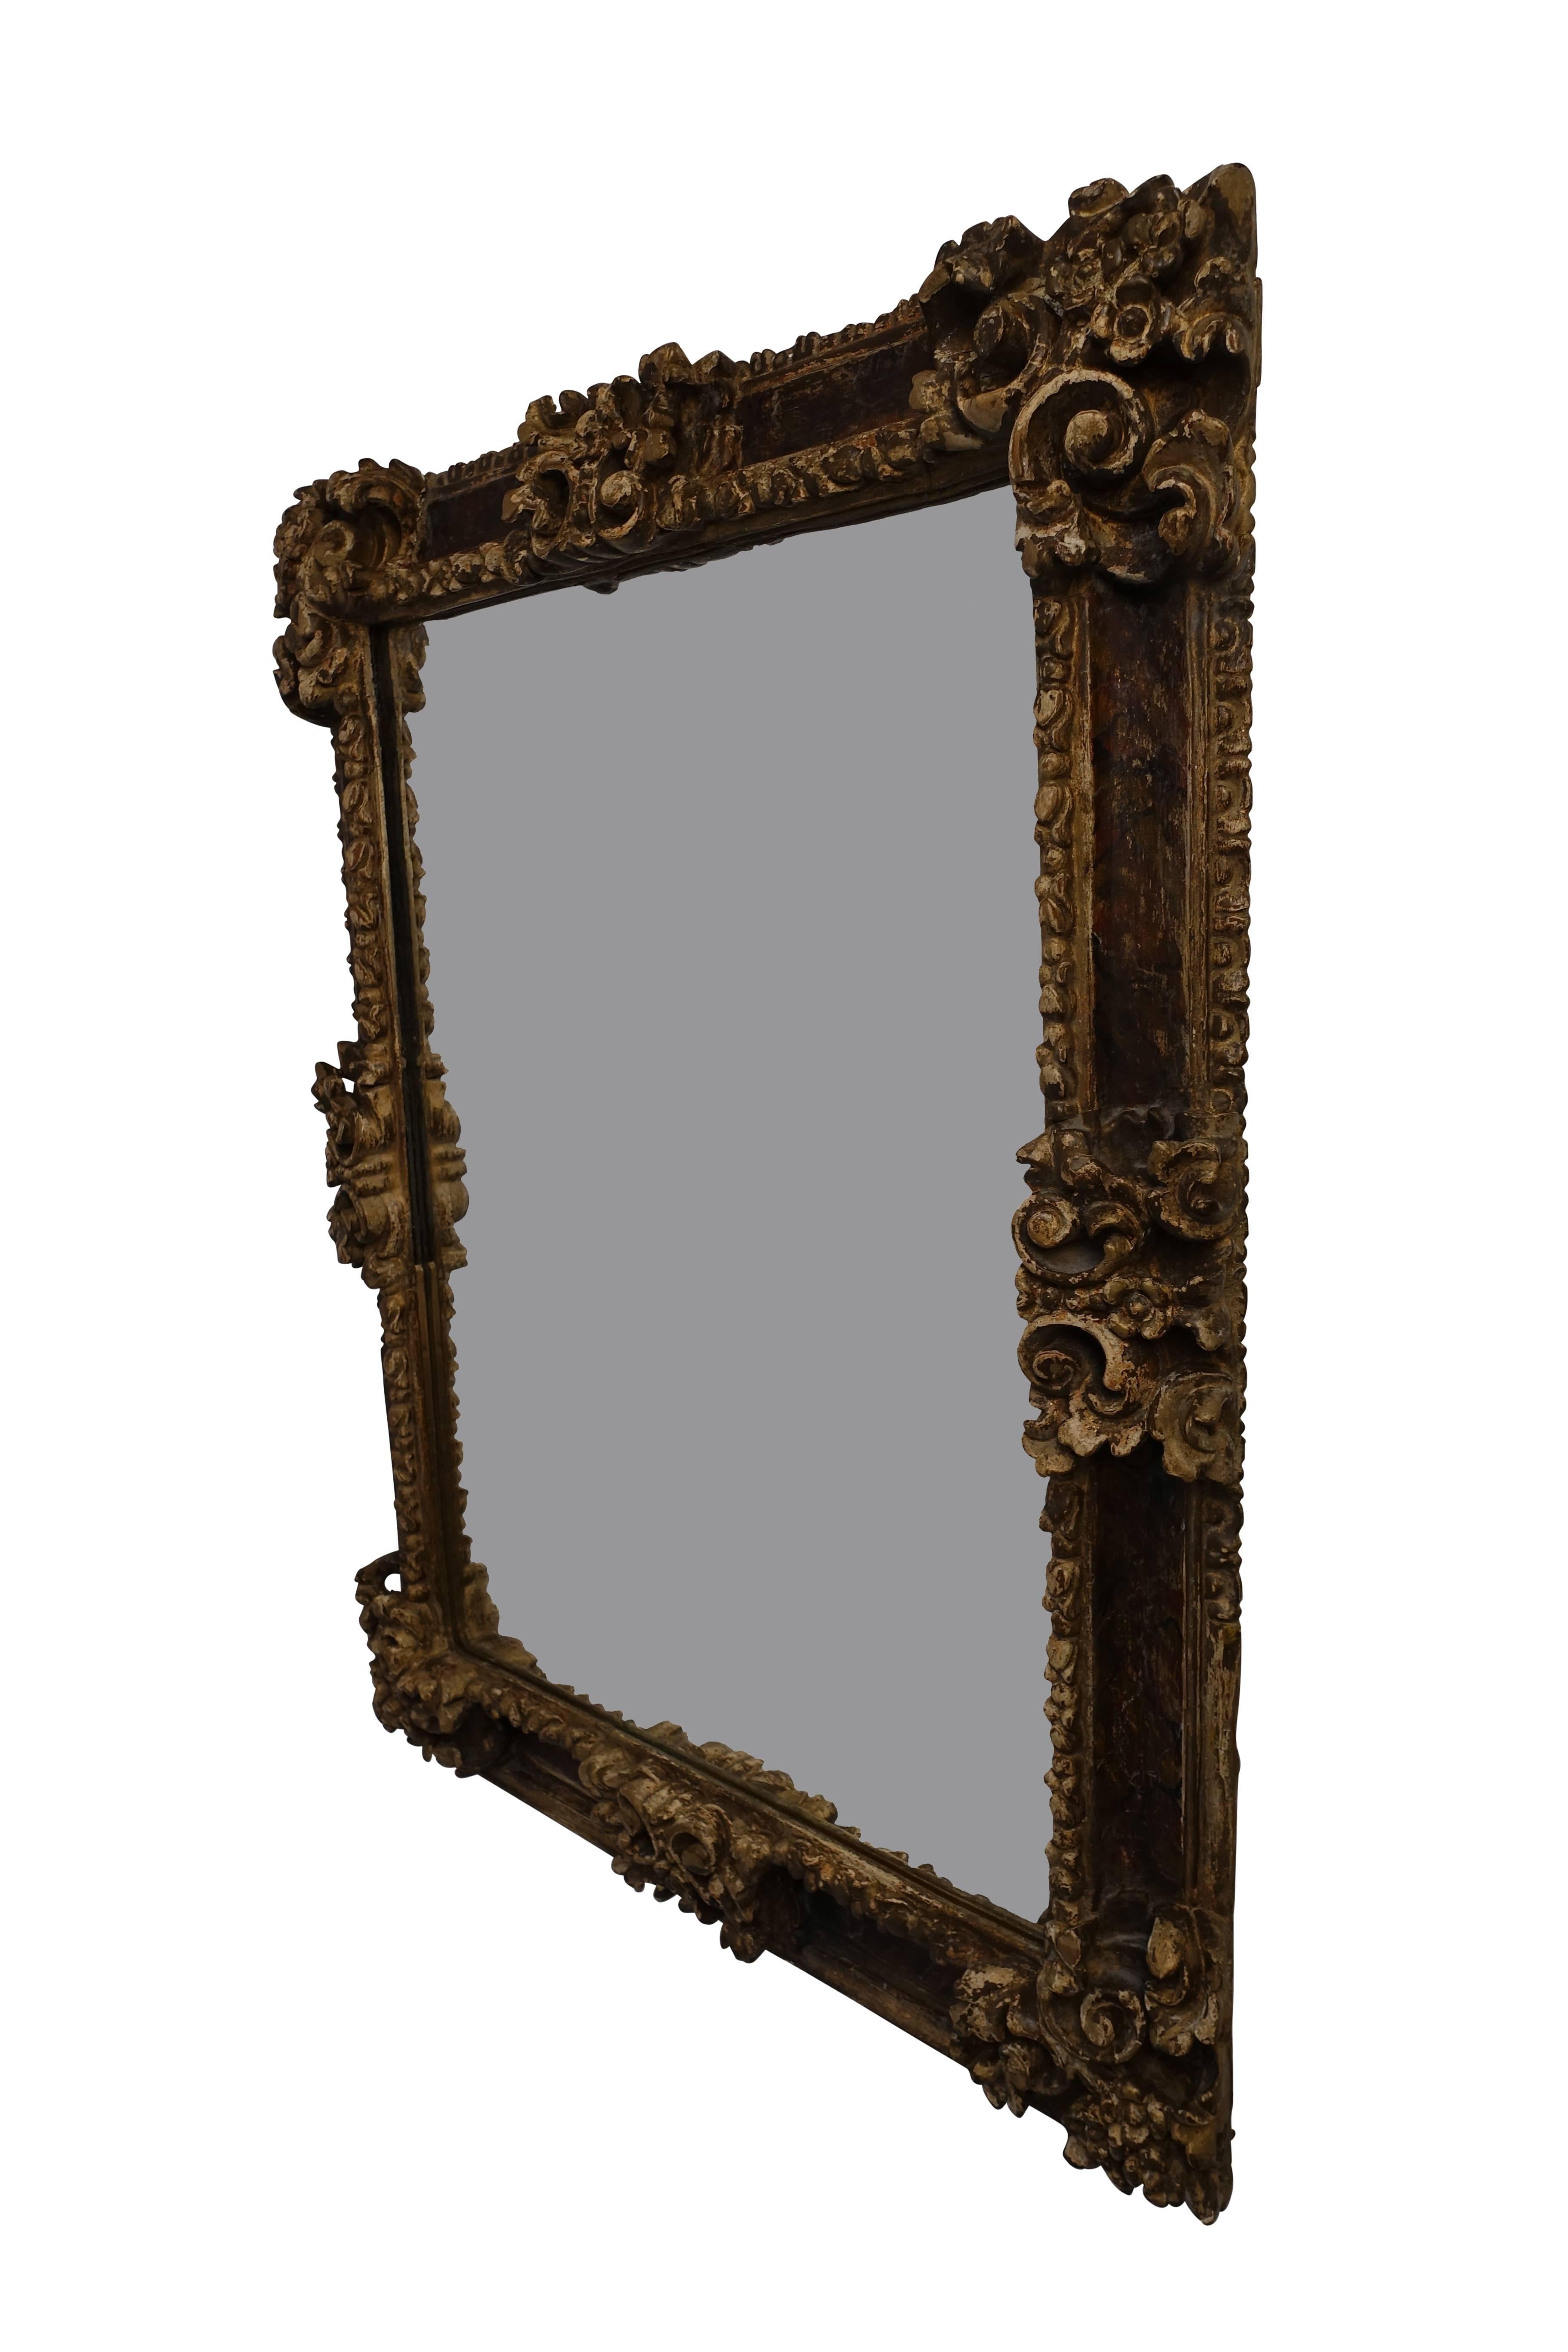 Carved Spanish Colonial Gilt and Painted Mirror Frame, 19th Century